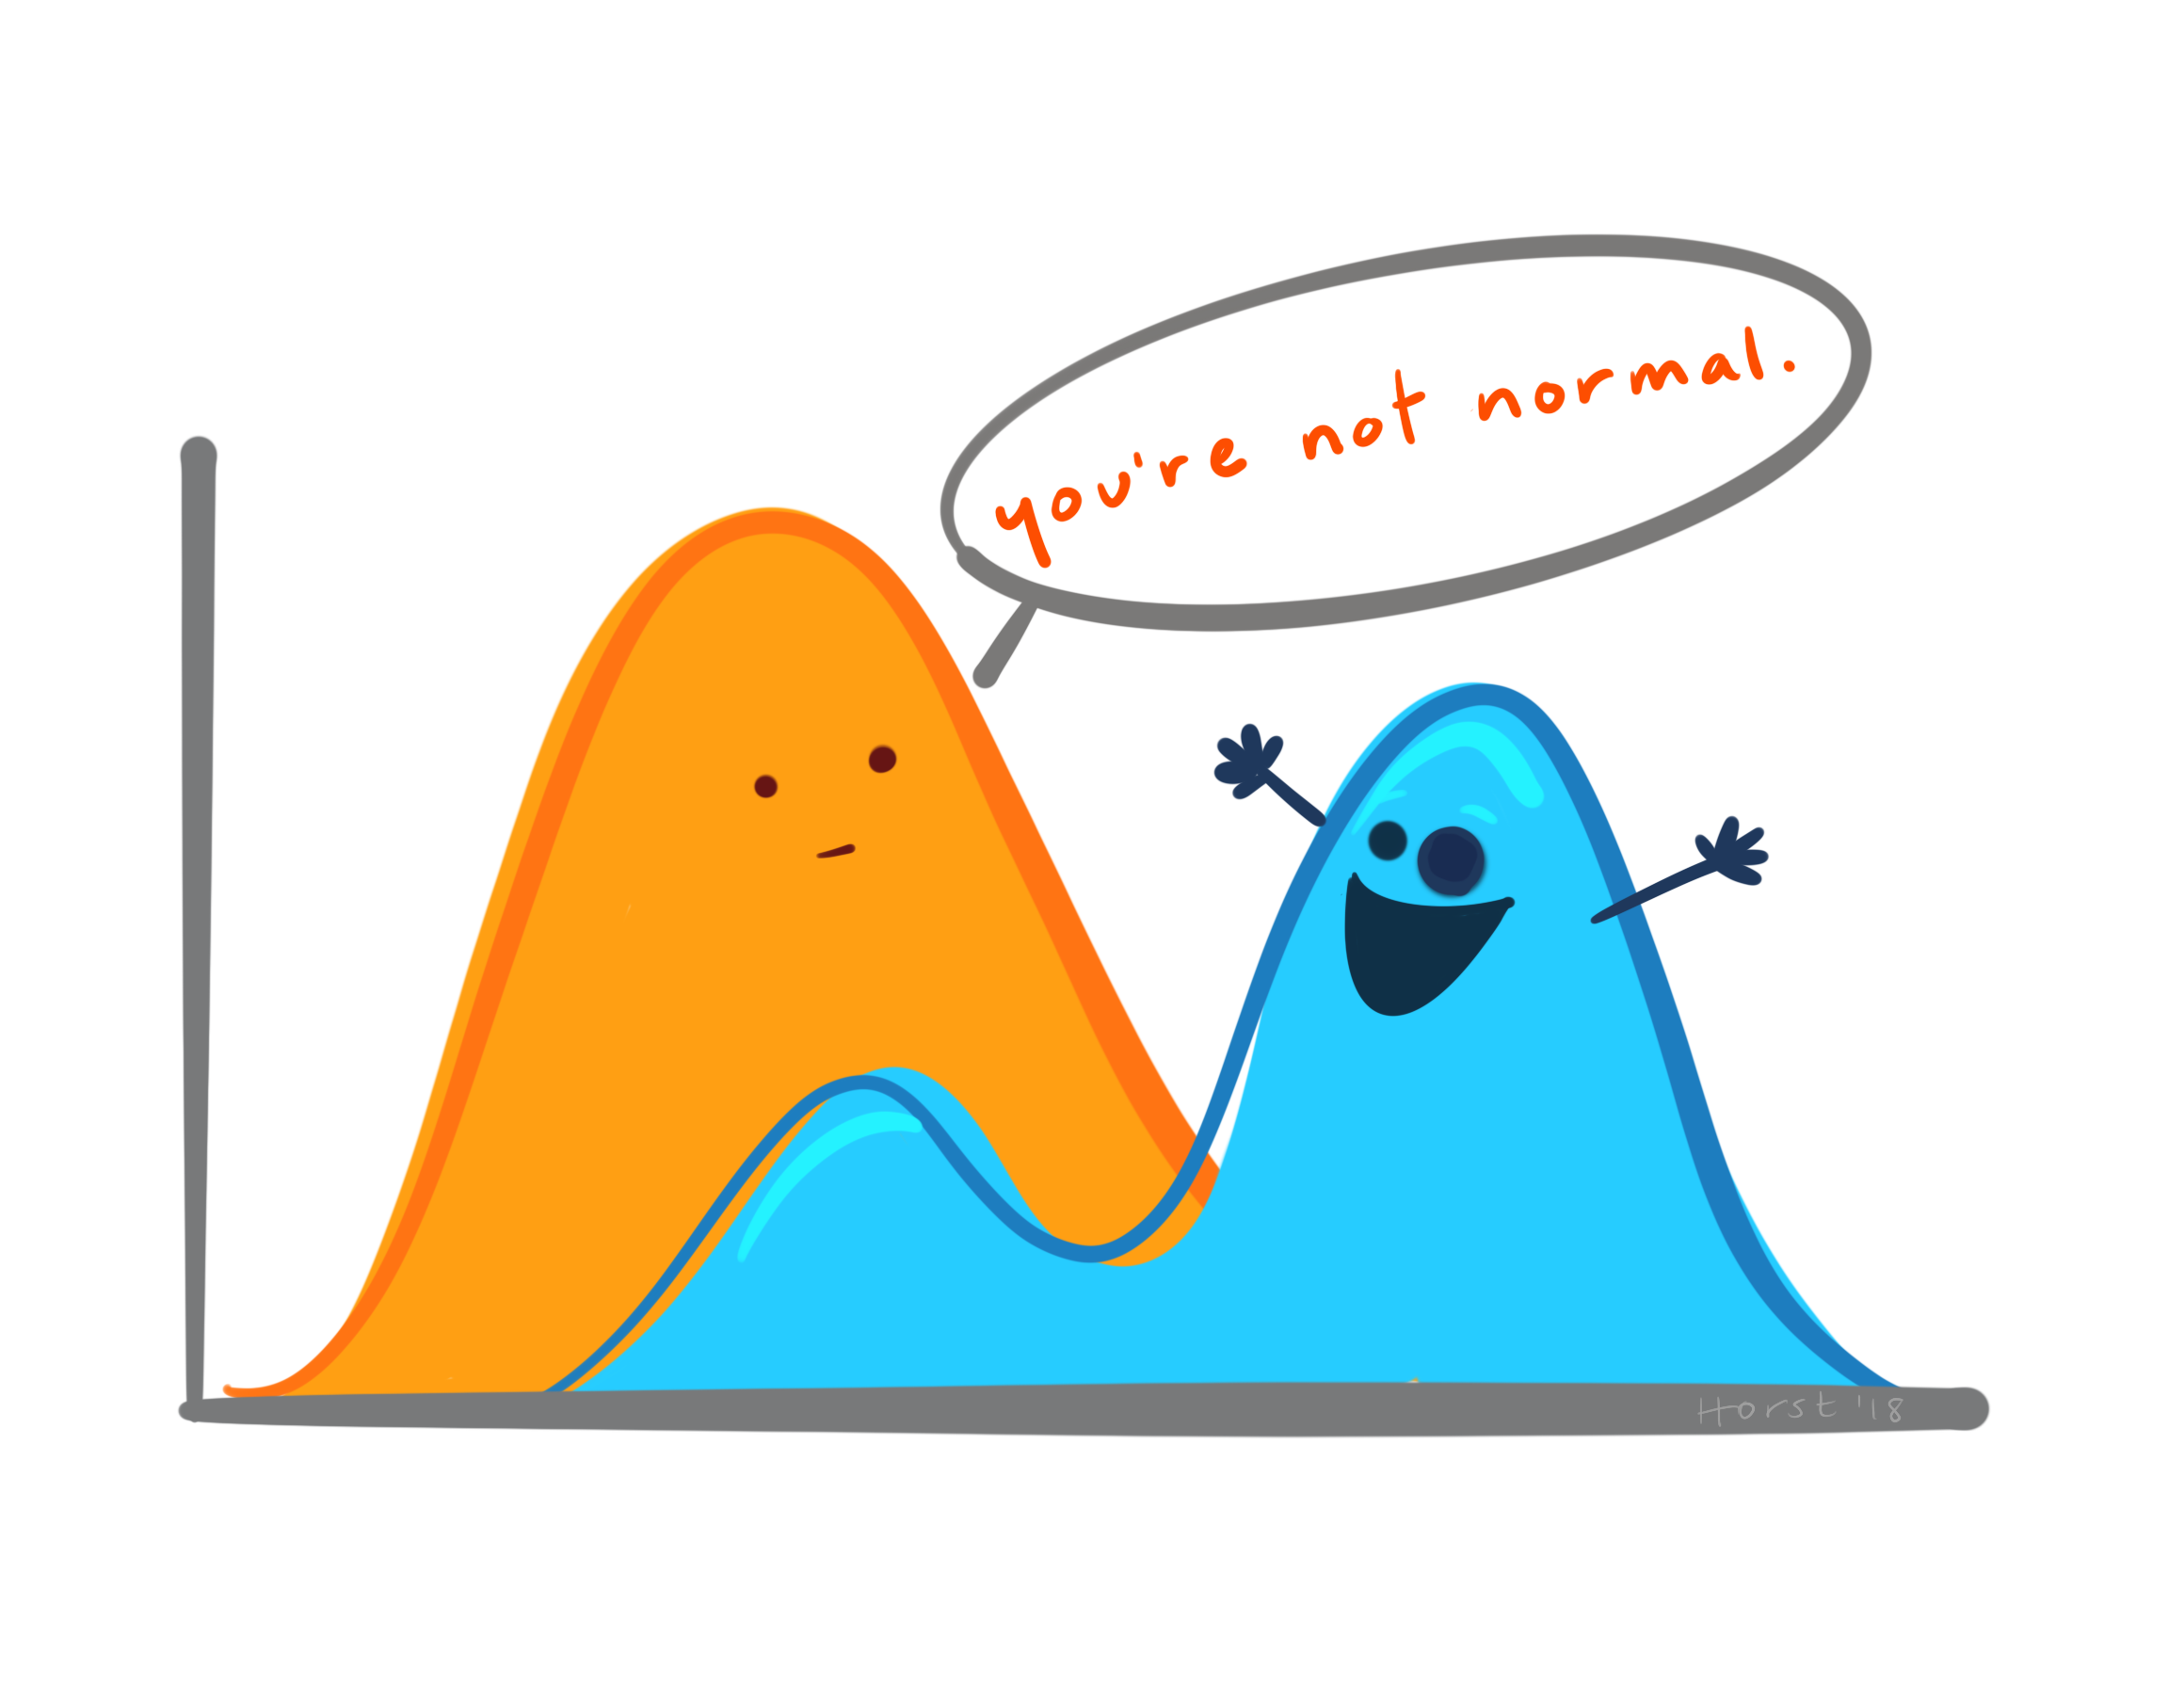 An orange normal distribution and a blue bimodal distribution where the orange distribution tells the blue one it is not normal